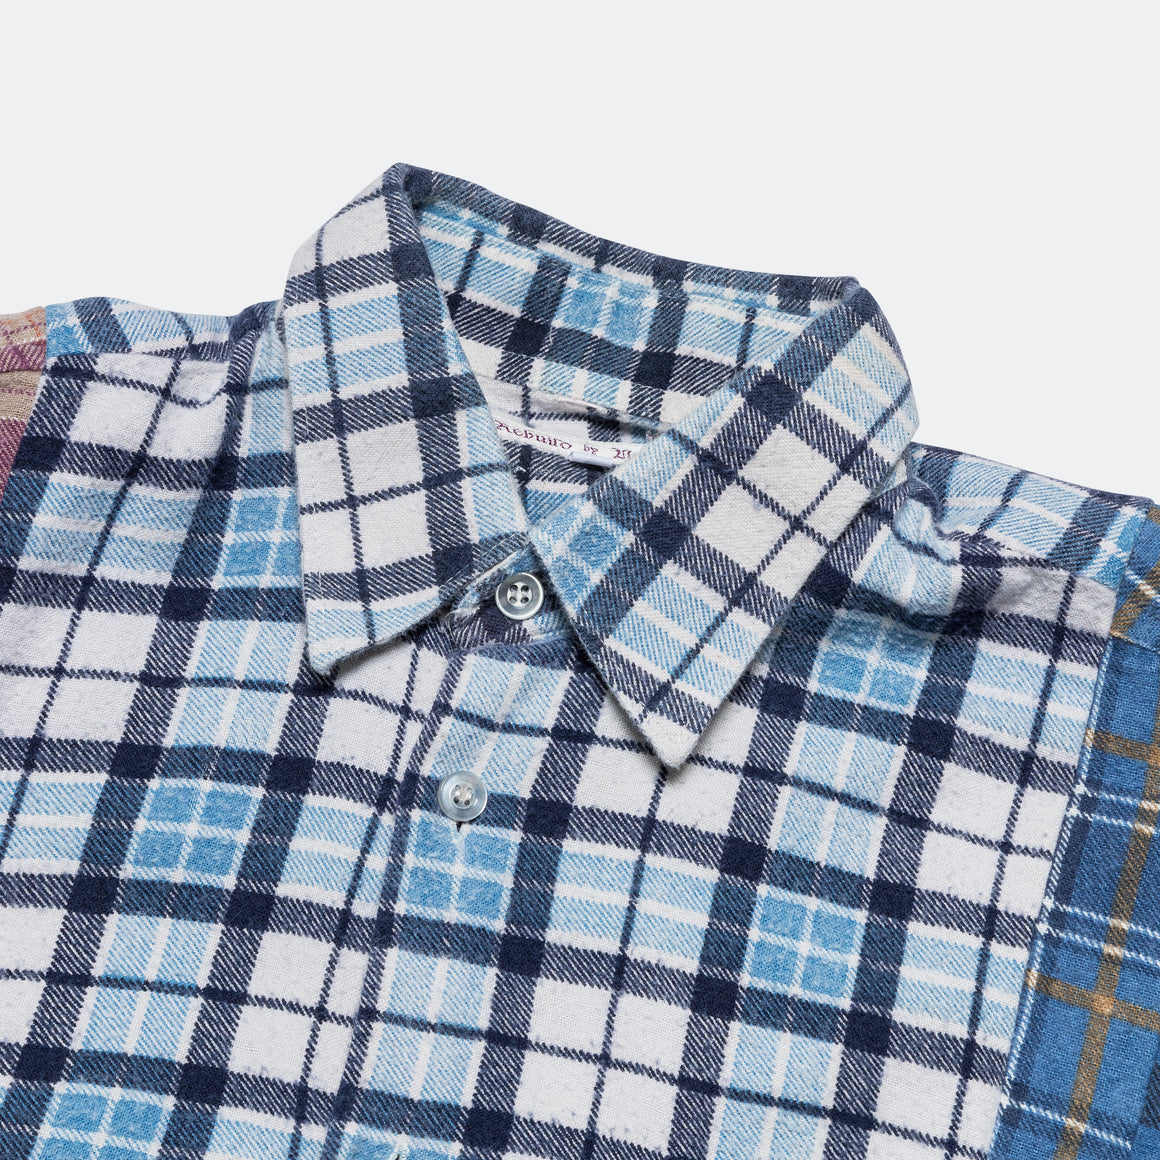 Needles - Rebuild Flannel 7 Cuts Shirt - Large #1 - UP THERE